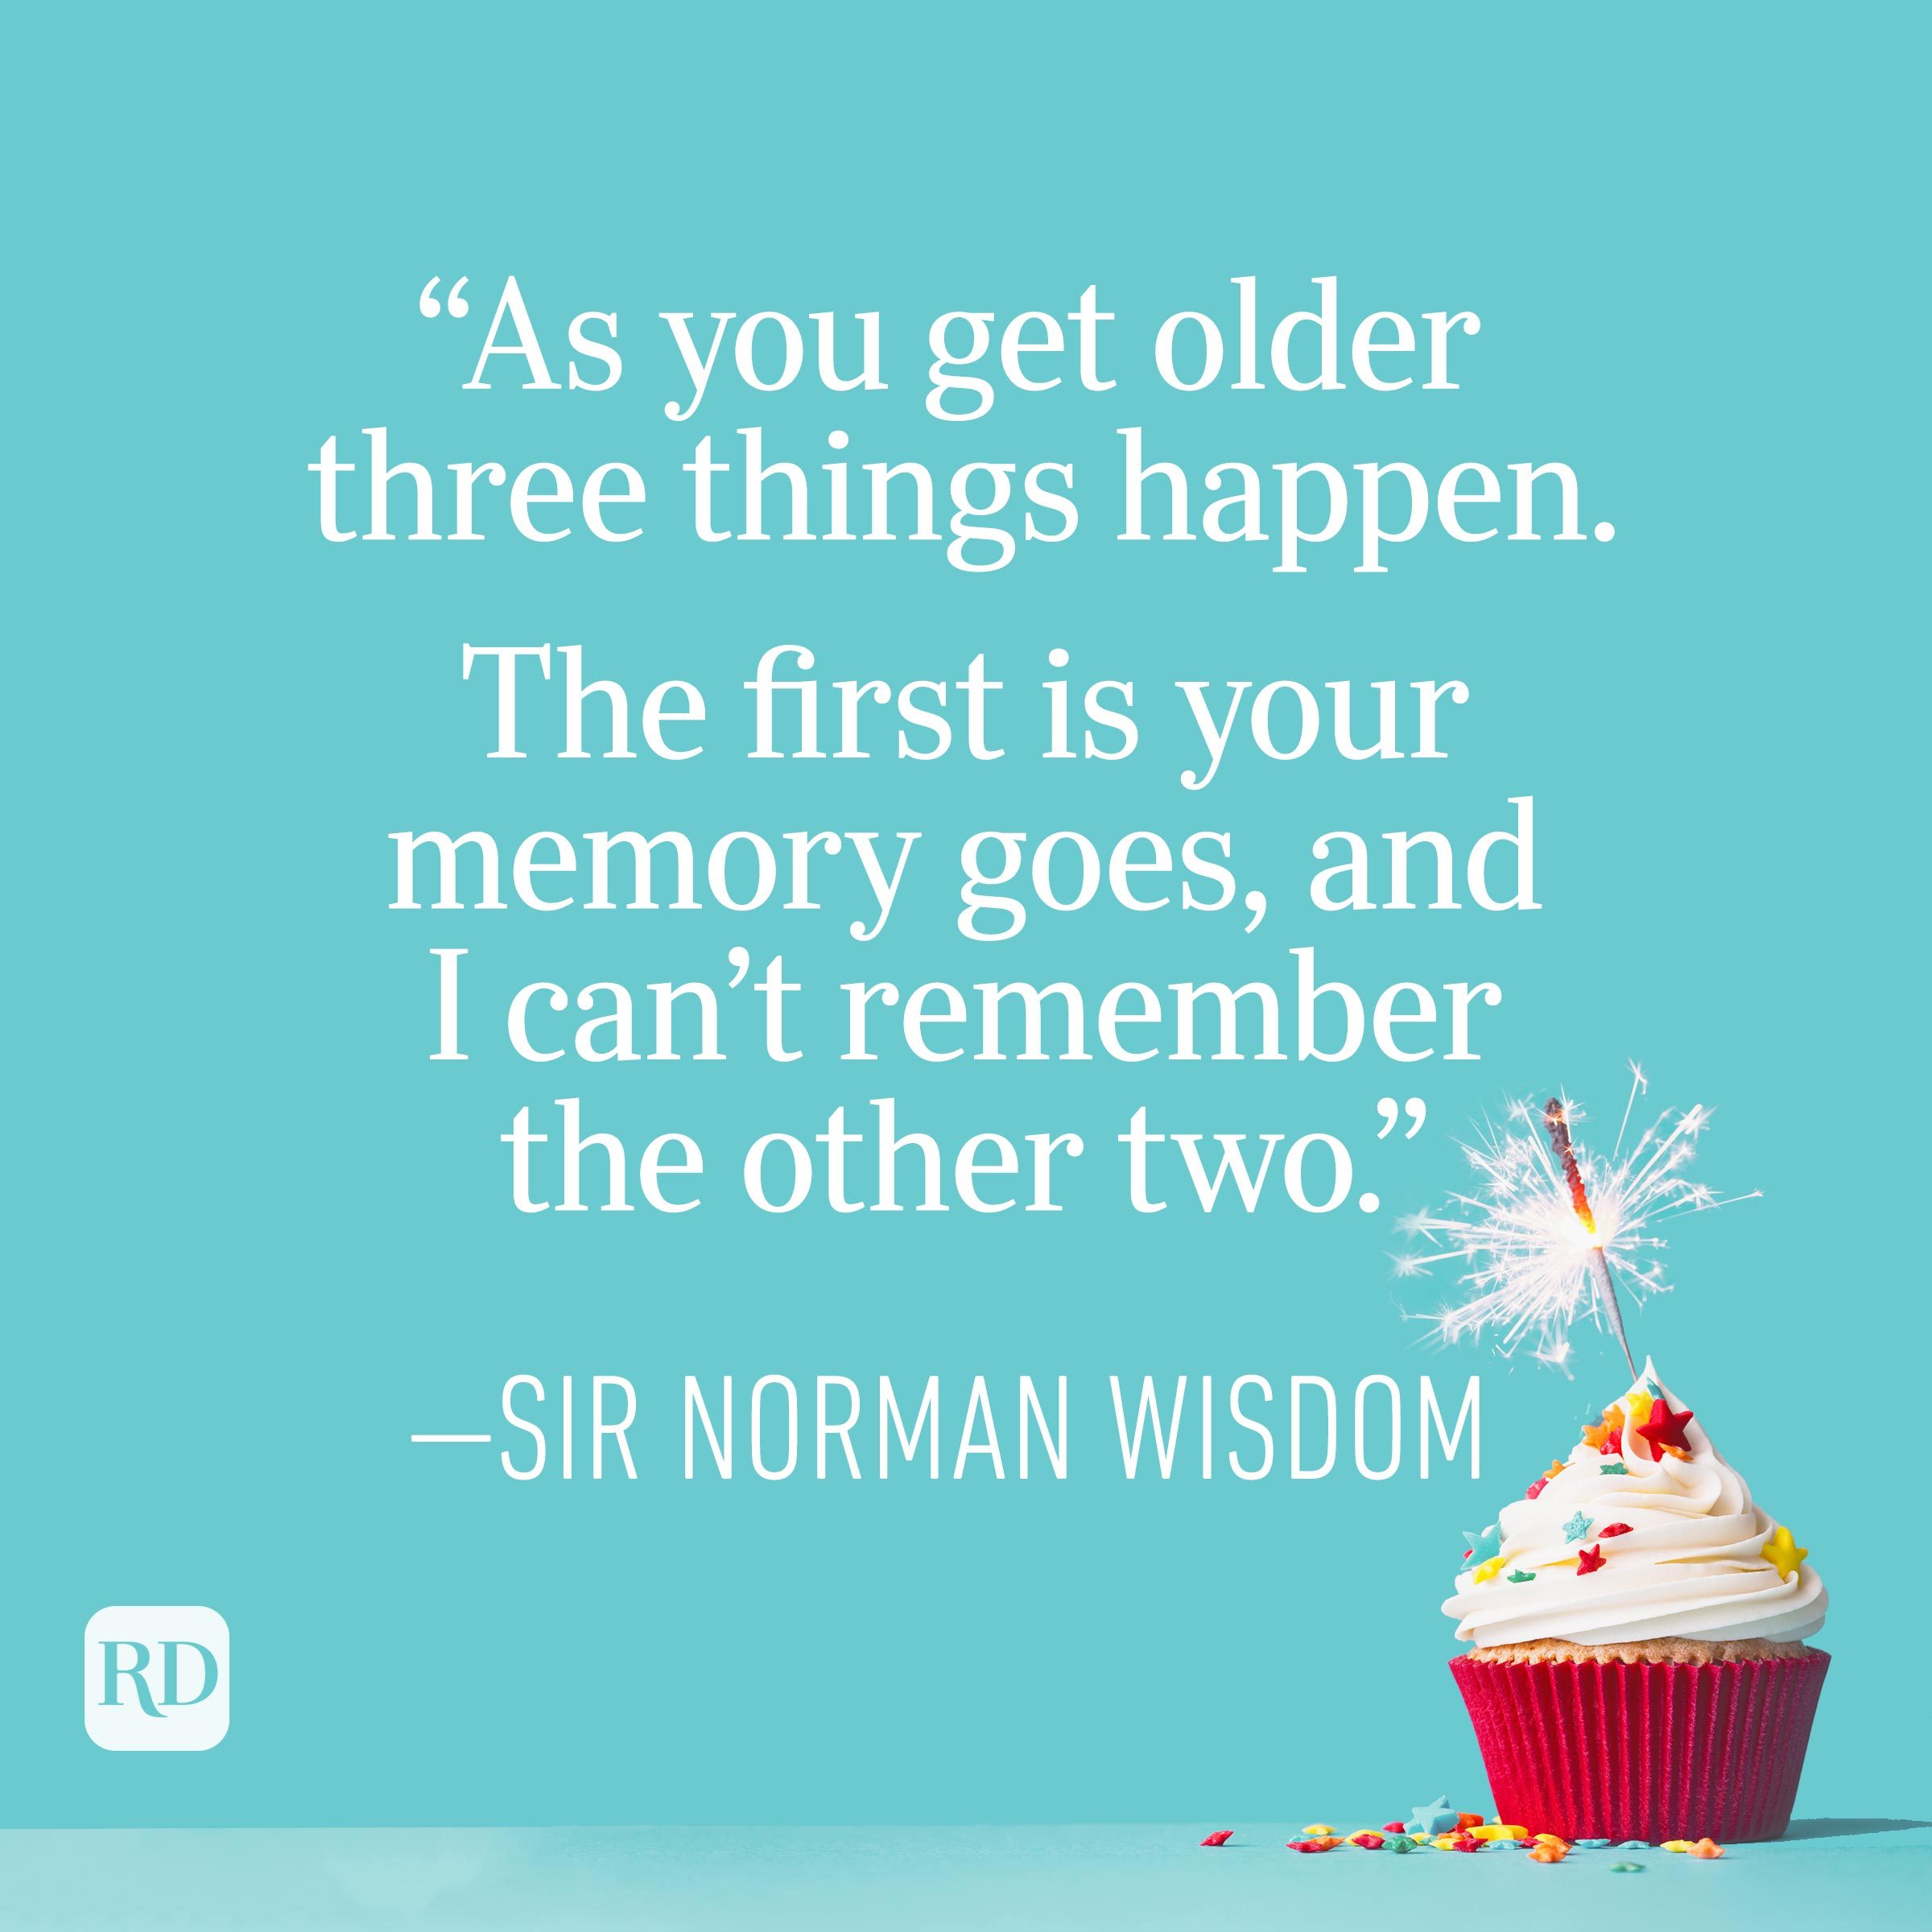 "As you get older three things happen. The first is your memory goes, and I can't remember the other two." —Sir Norman Wisdom